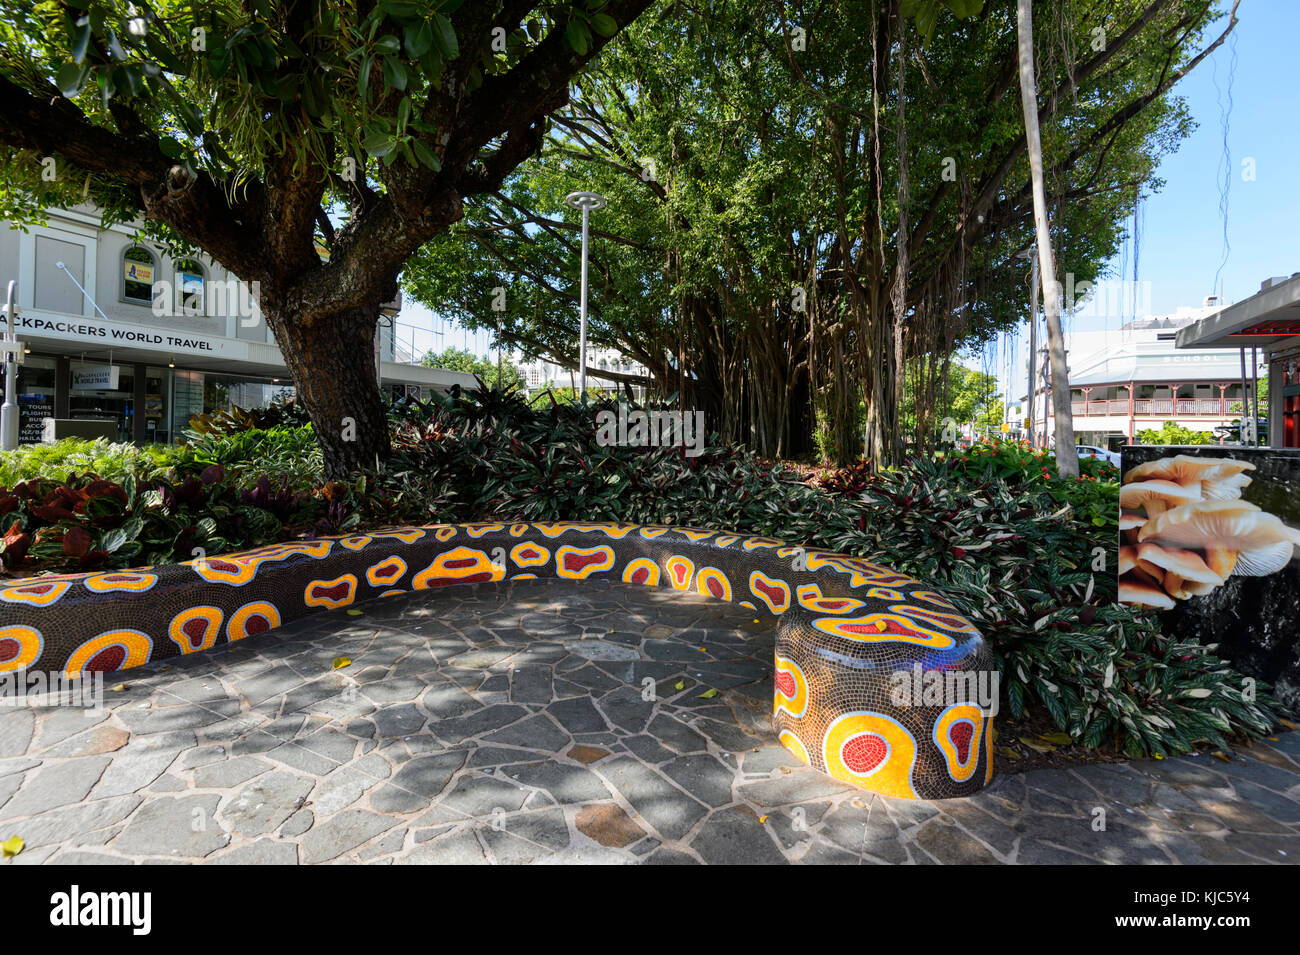 Mosaic Aboriginal artwork on a bench shaped as a snake in Shields Street, Cairns, Far North Queensland, FNQ, QLD, Australia Stock Photo